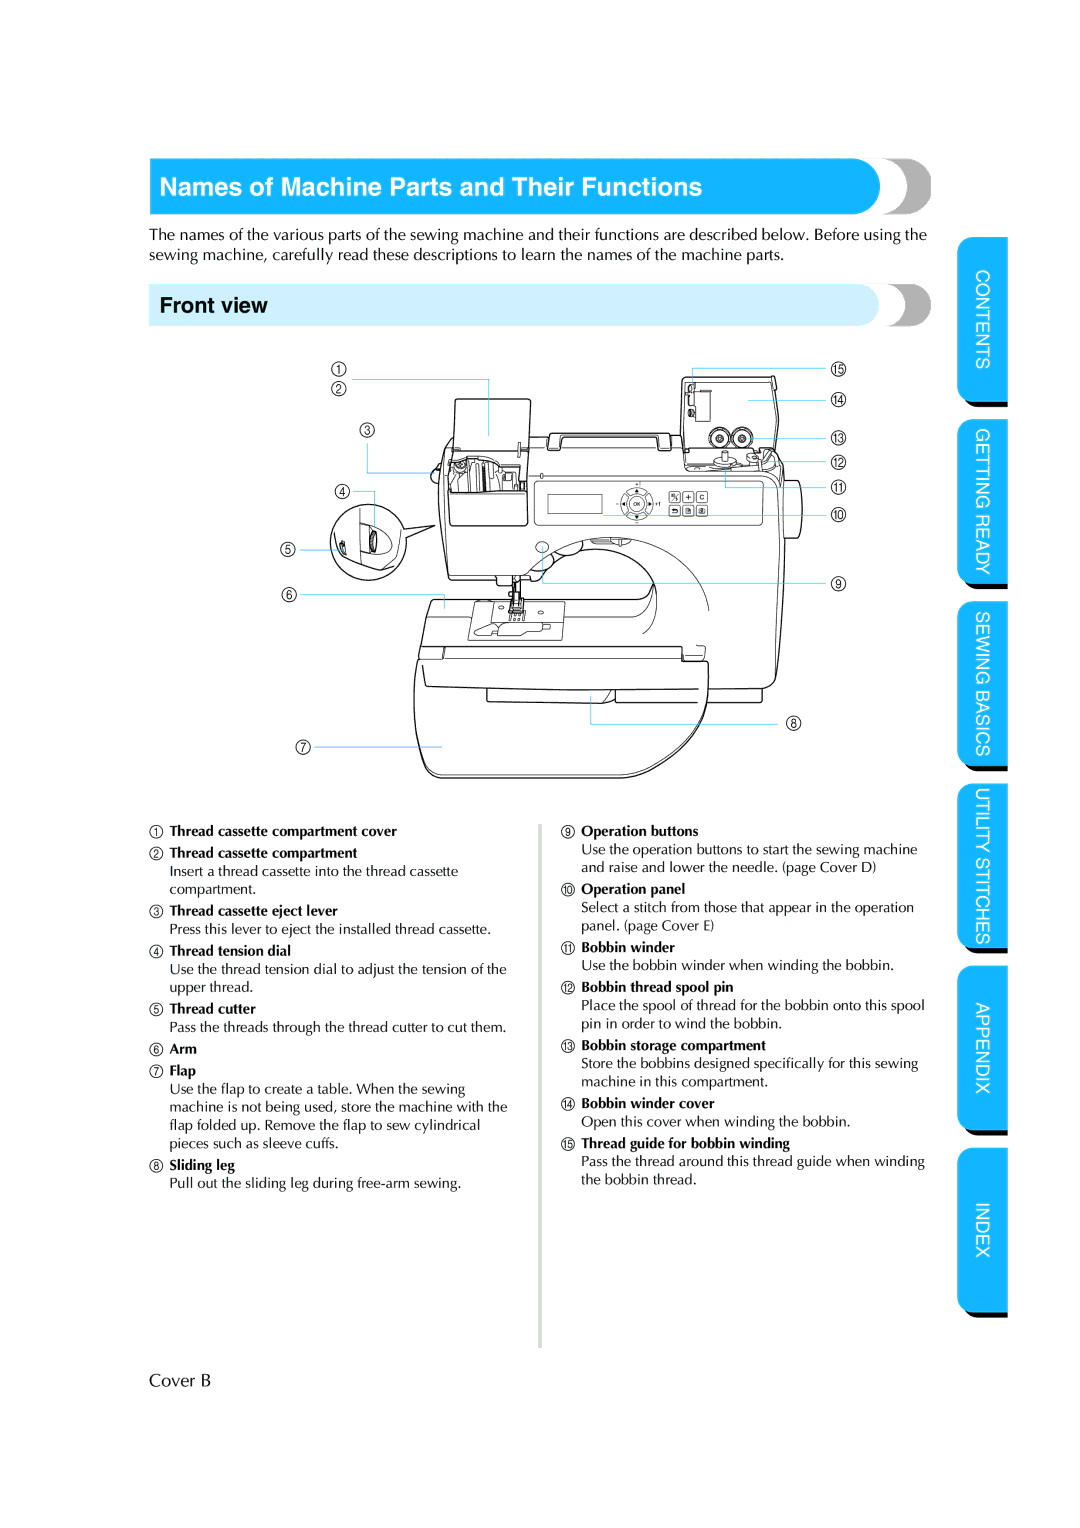 Brother CS-8150 manual Names of Machine Parts and Their Functions, Front view 